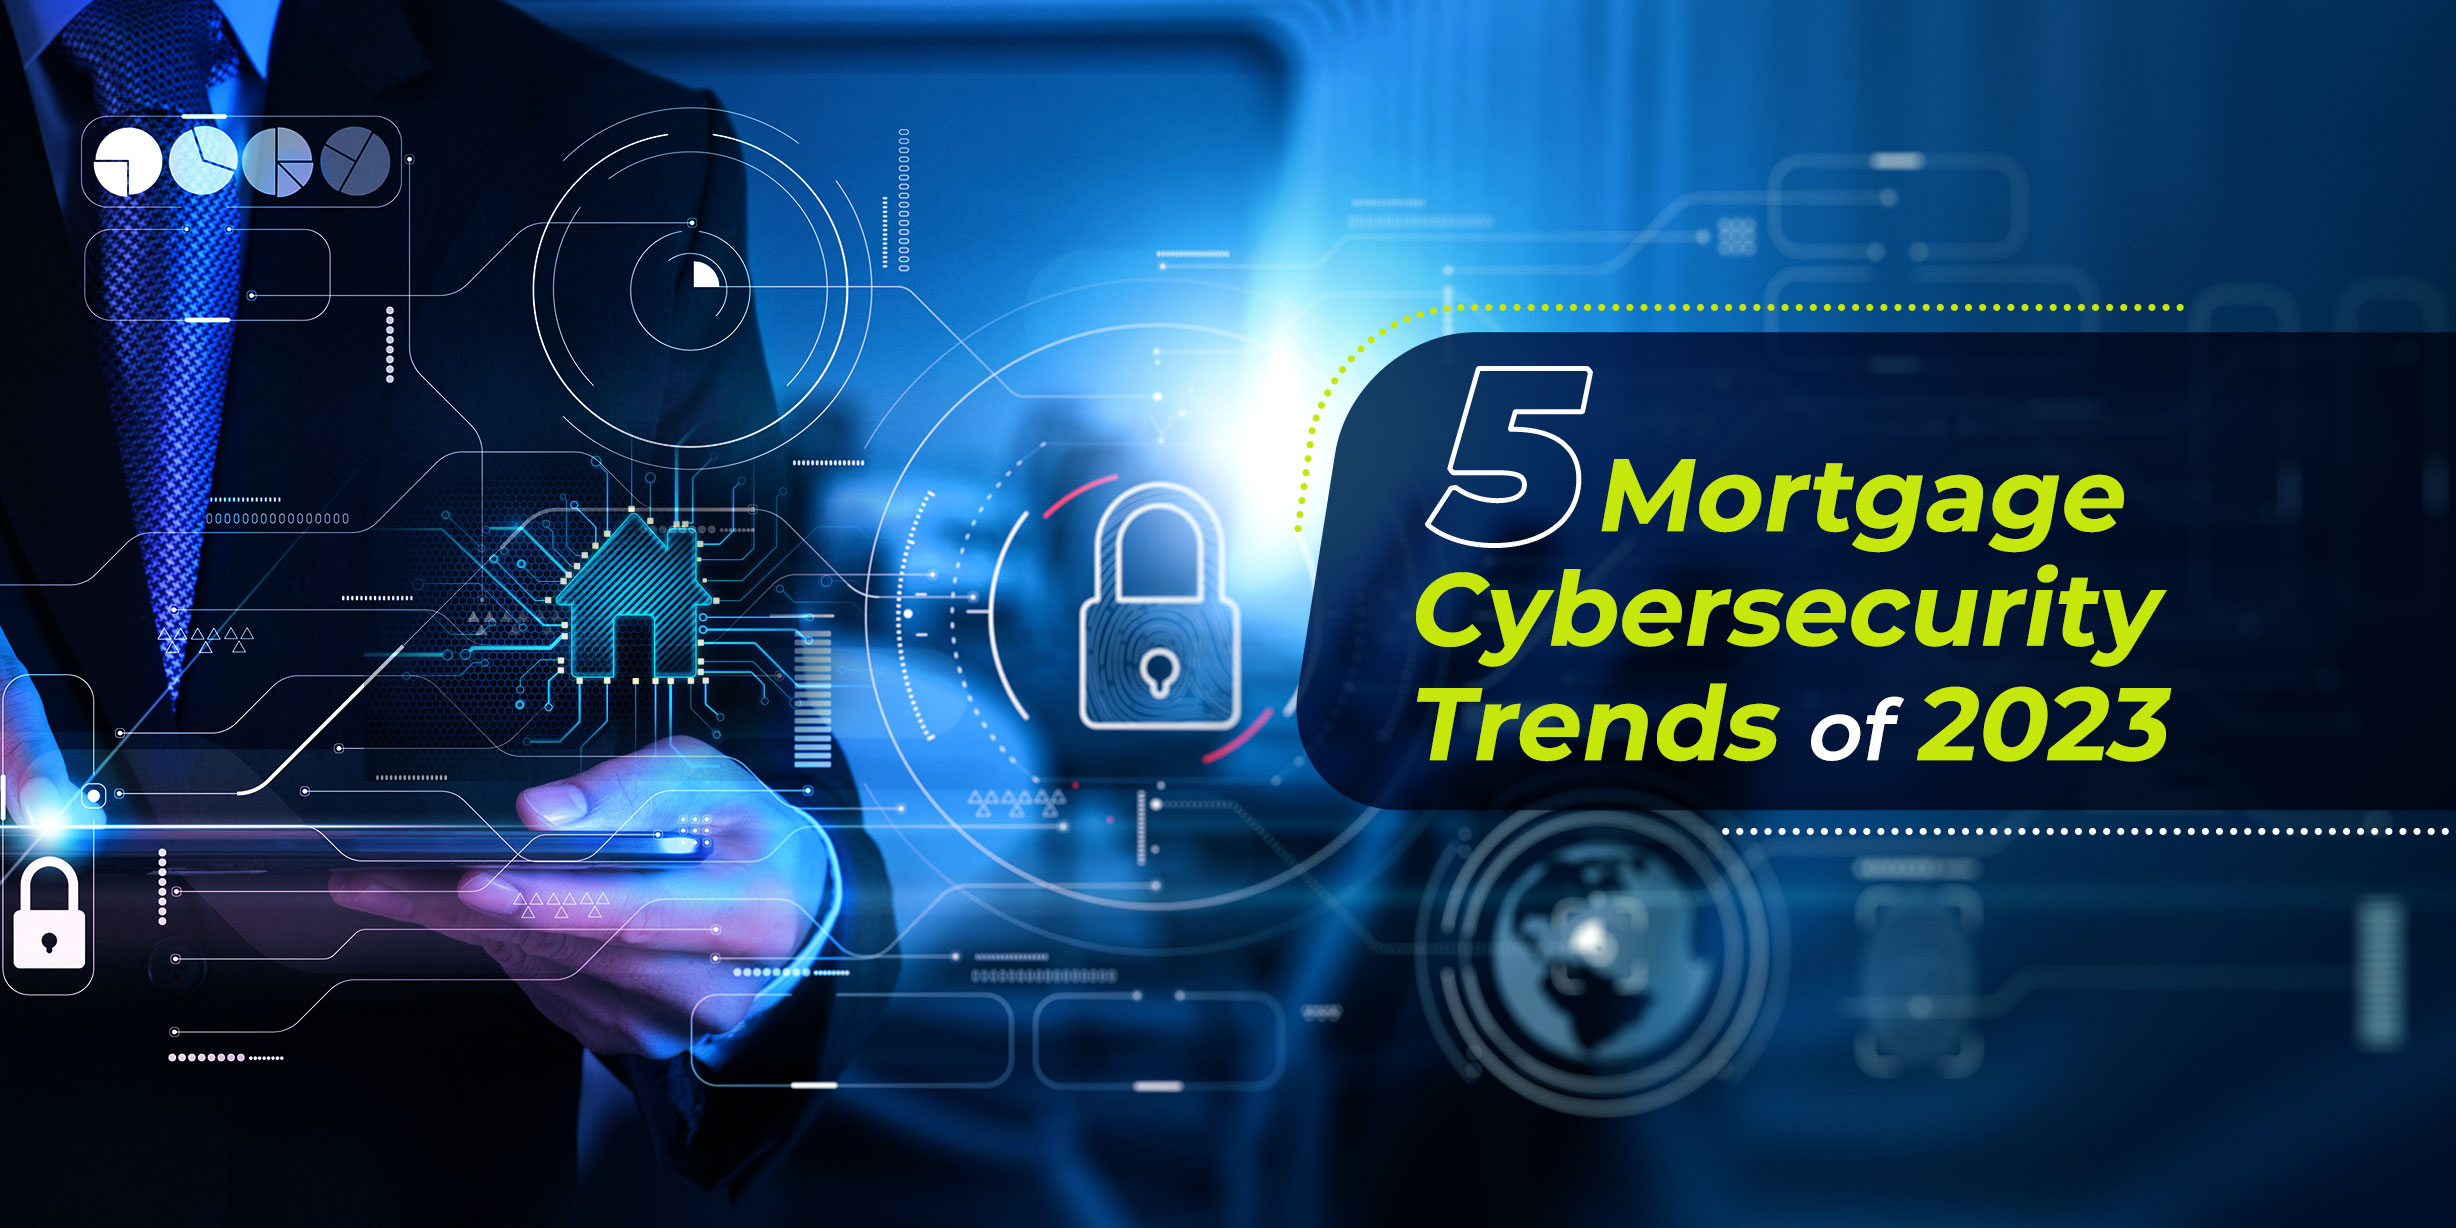 5 Mortgage Cybersecurity Trends of 2023